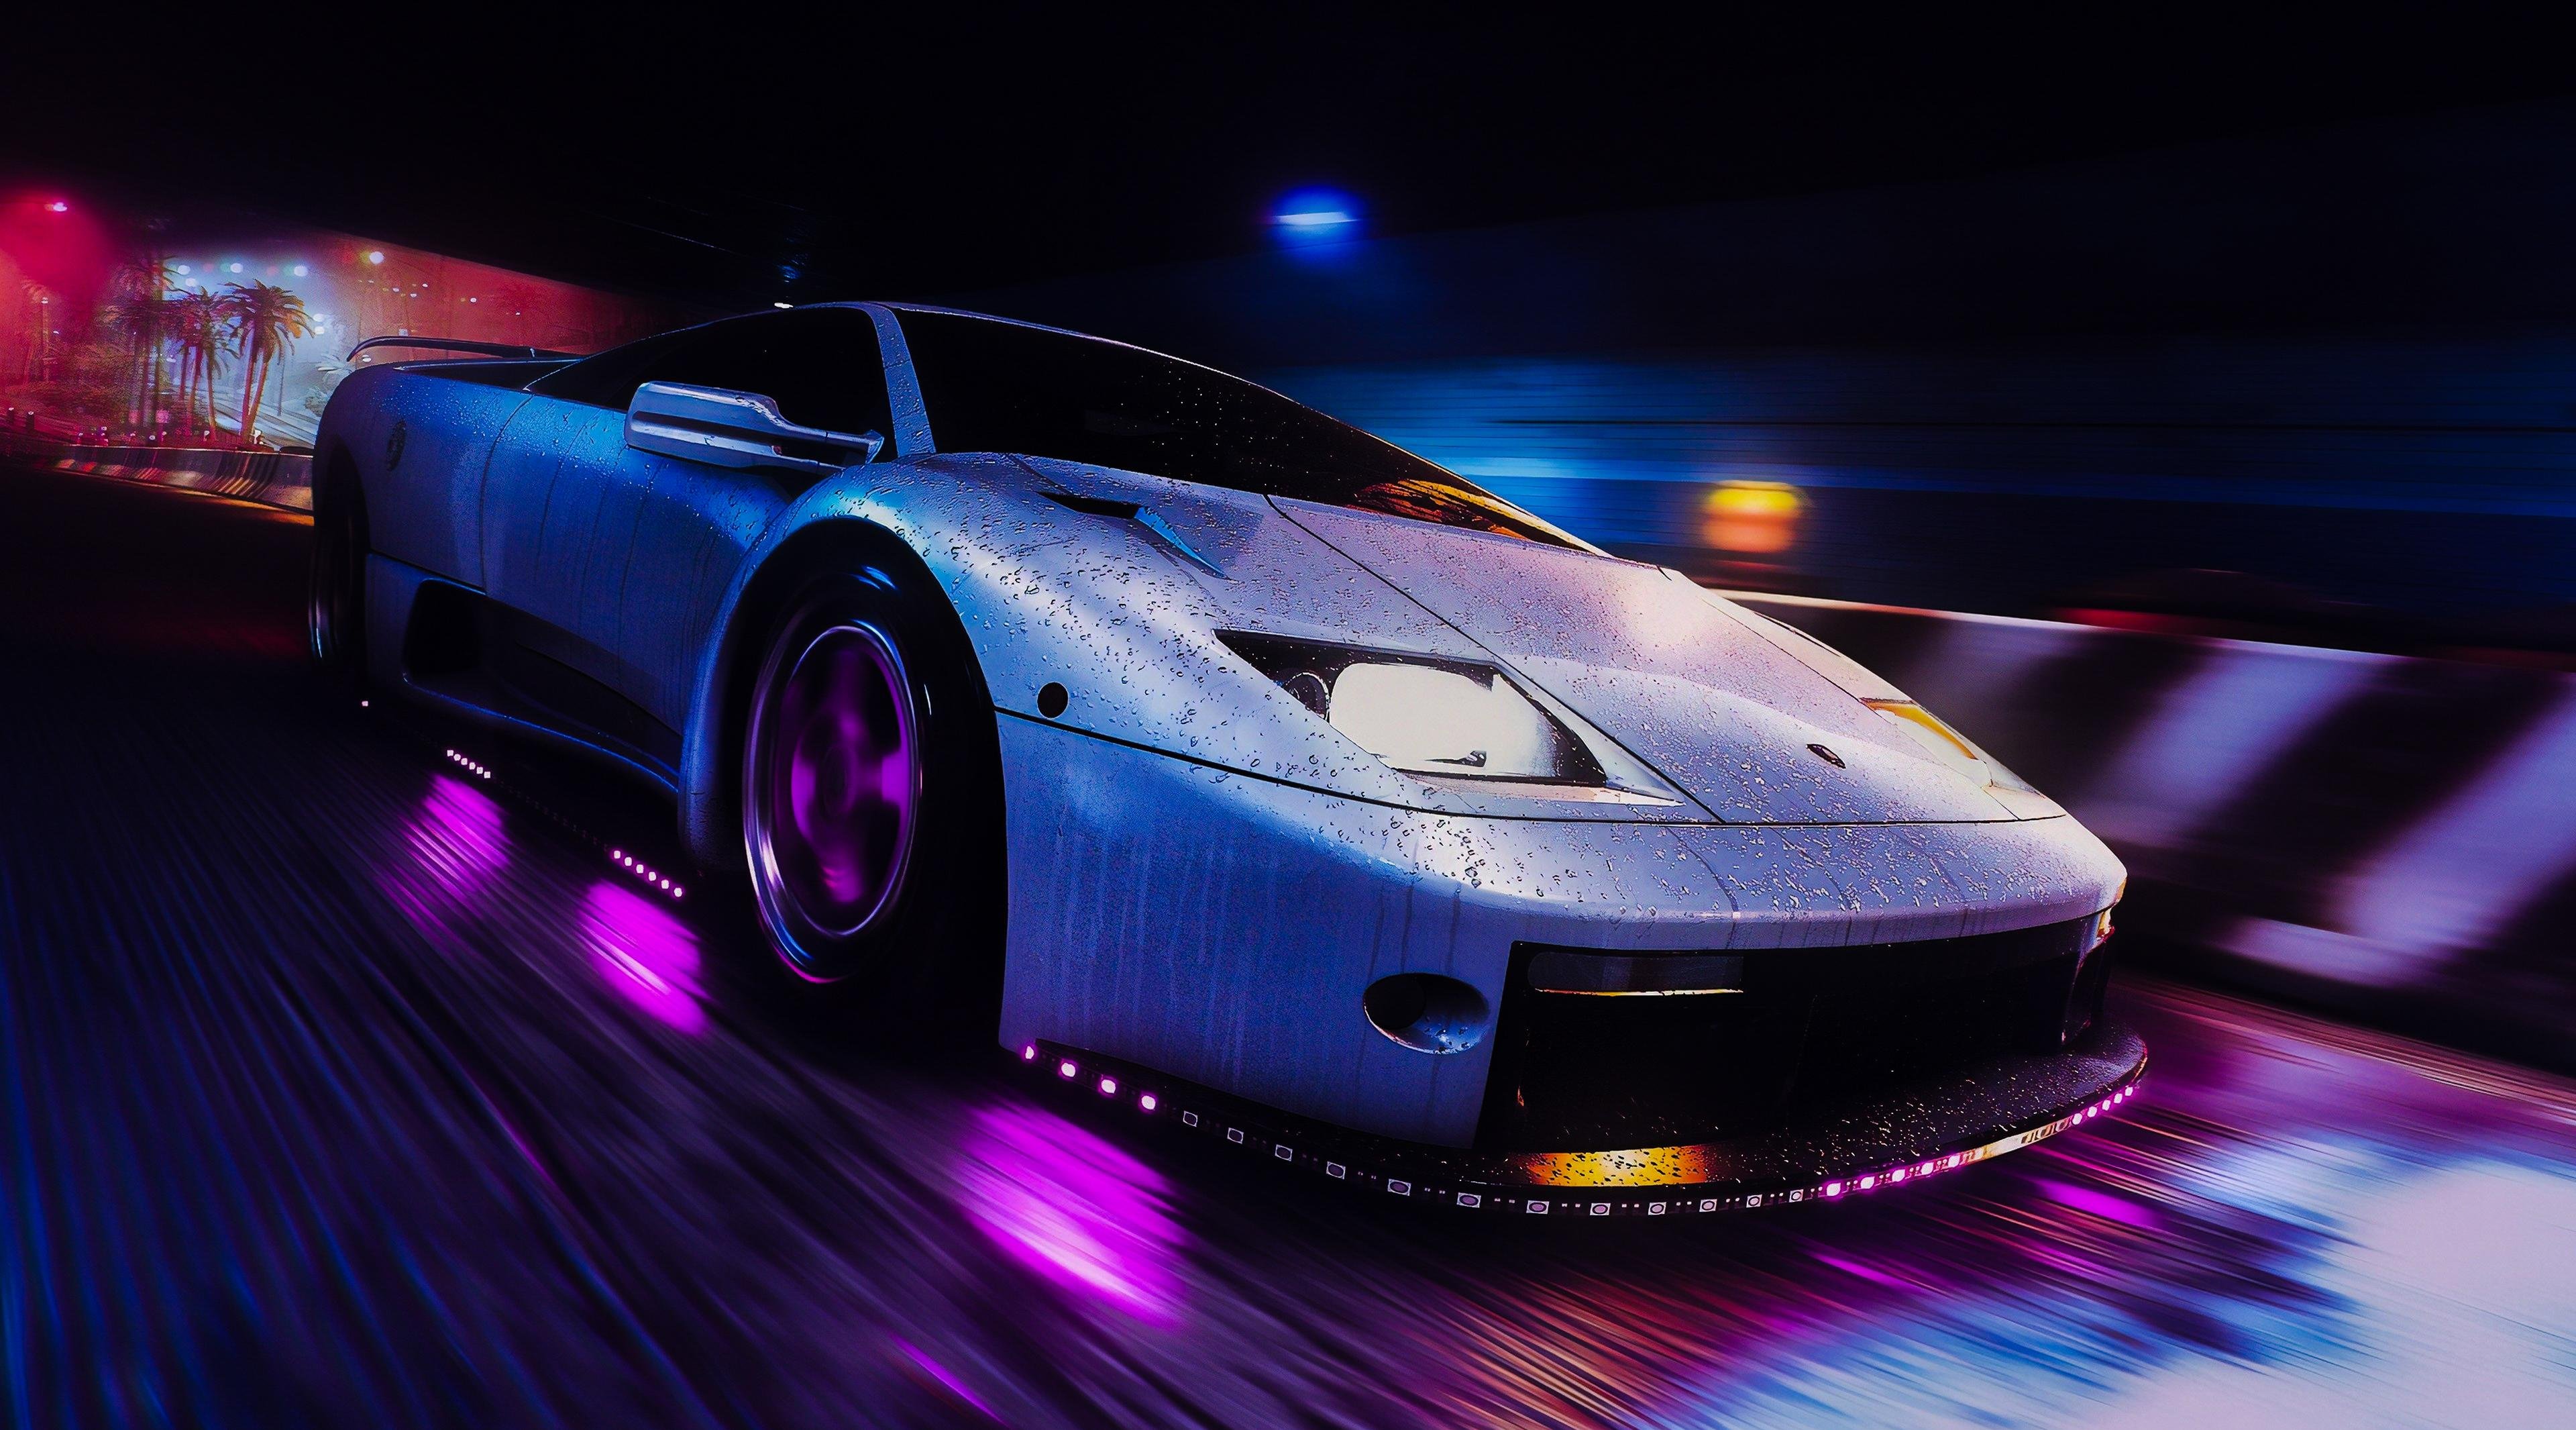 NFS Need For Speed Game Background Wallpapers 